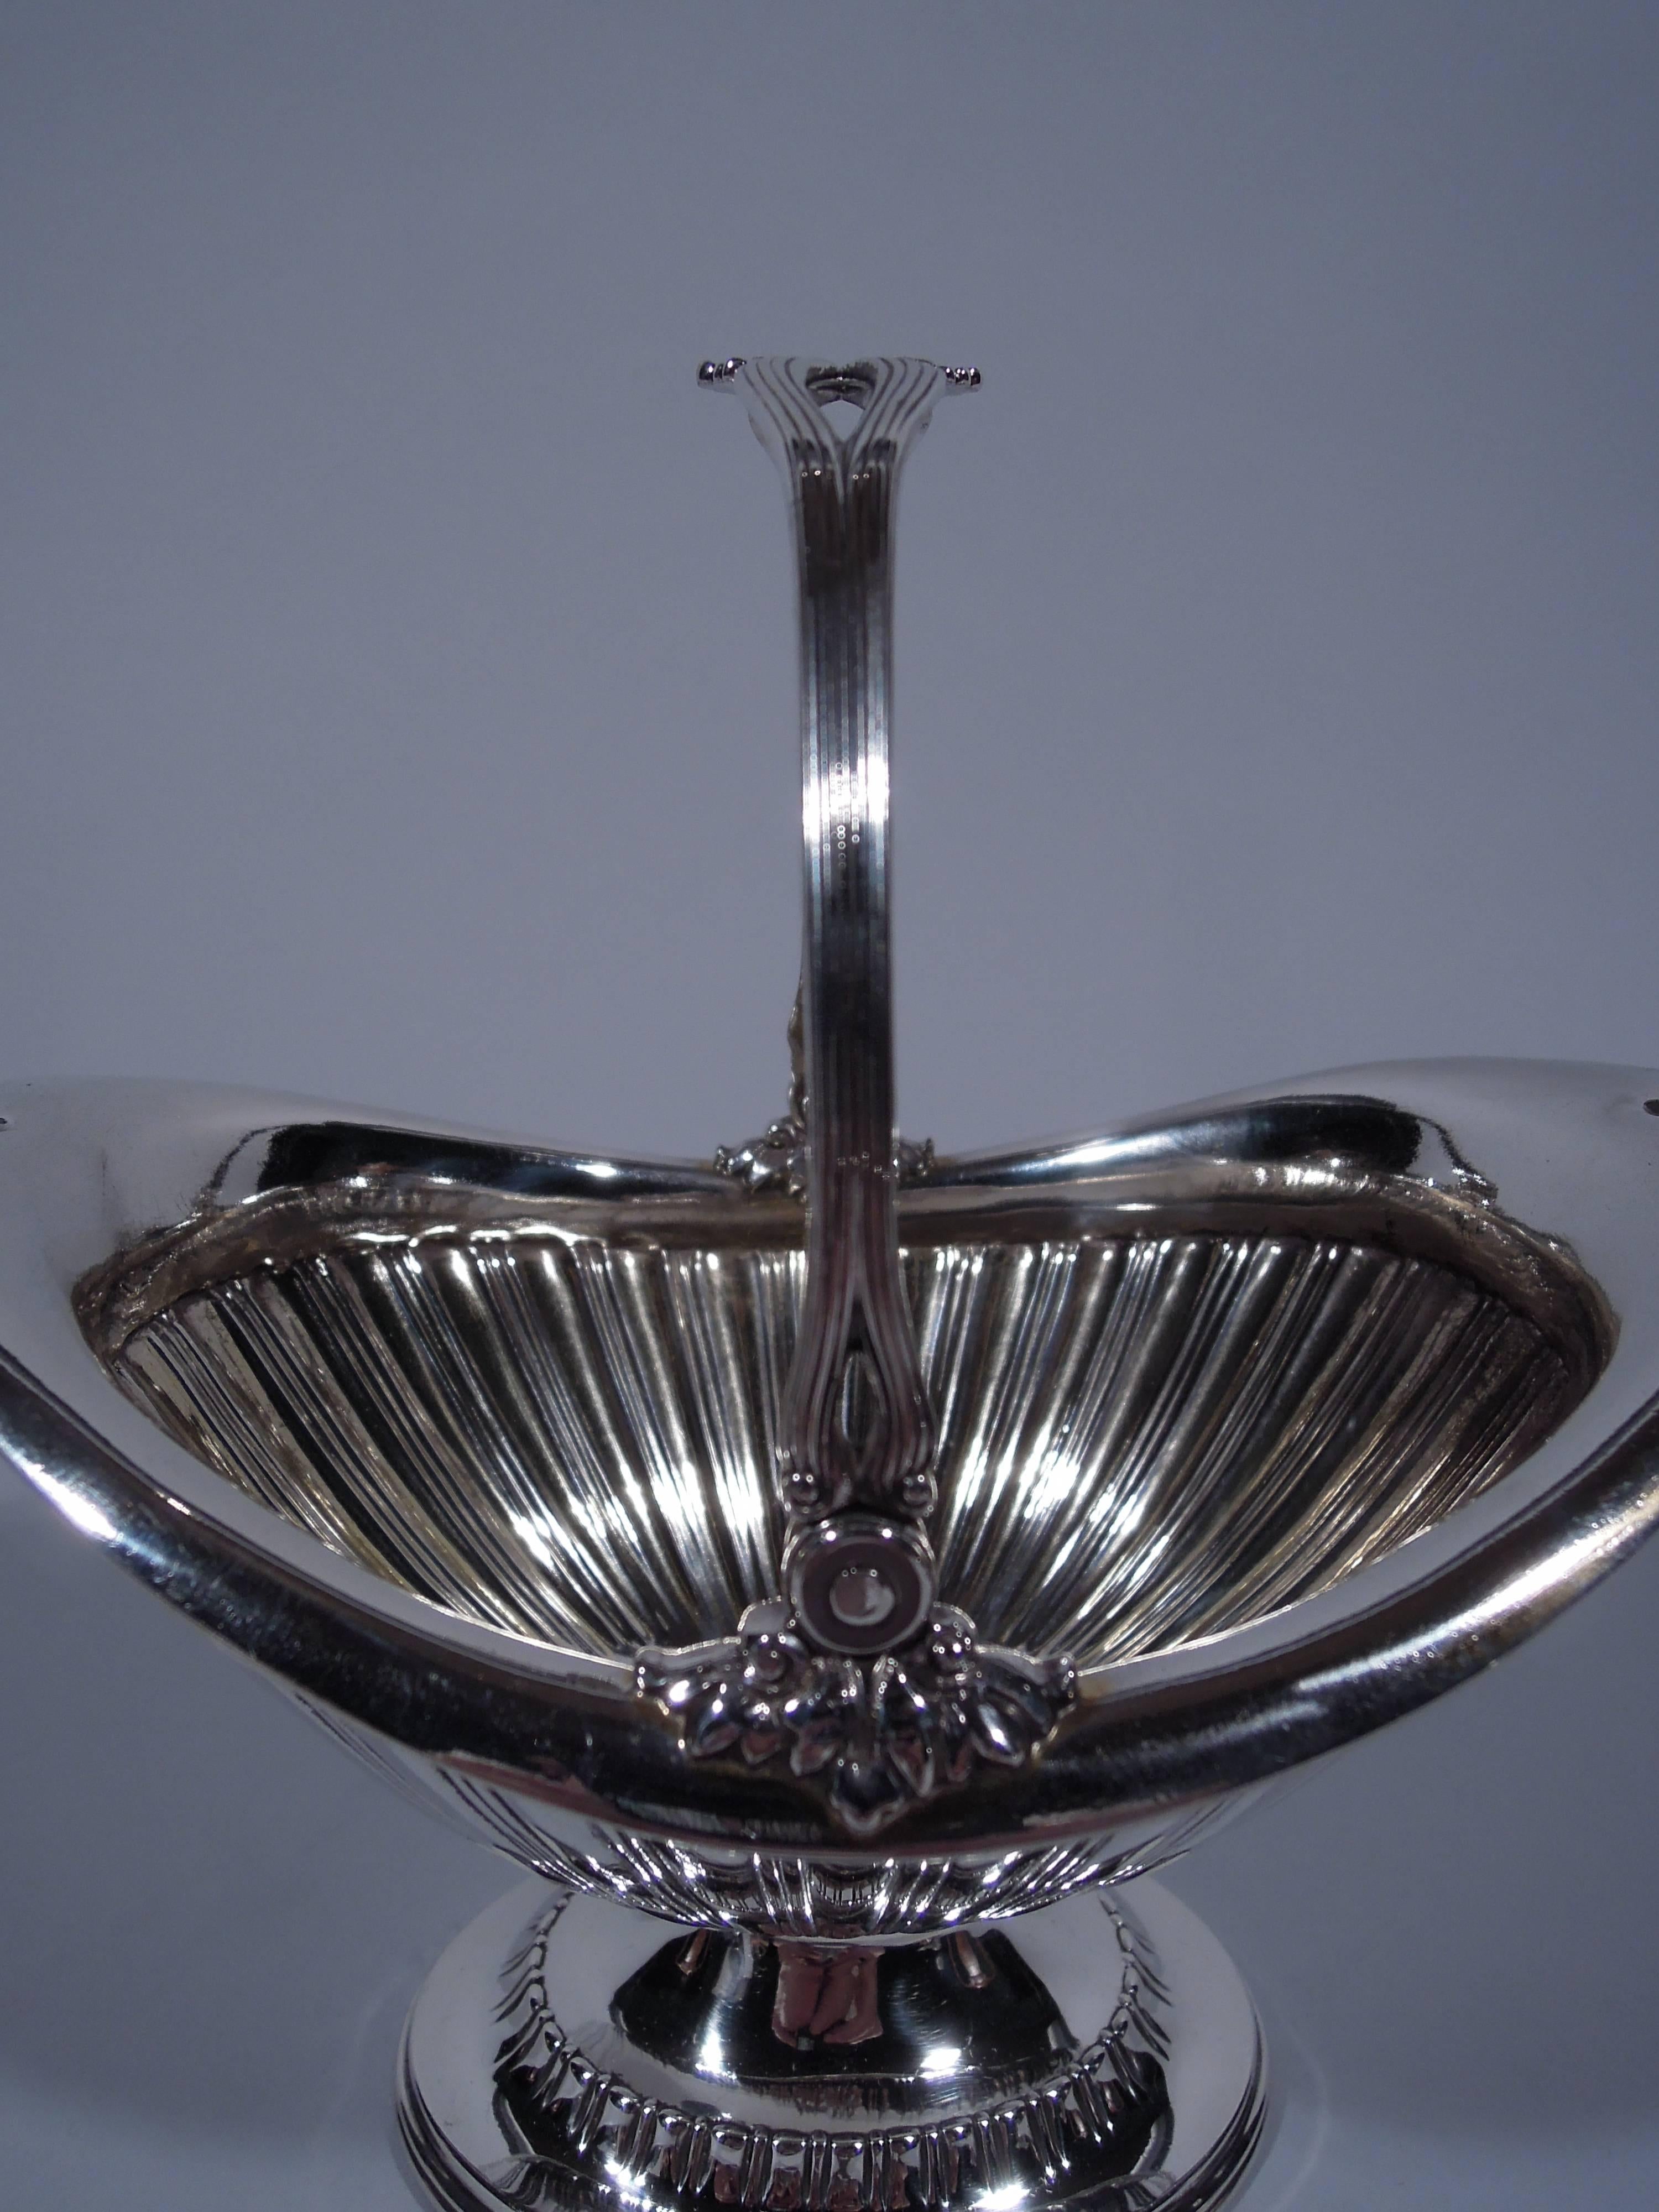 Sterling silver sugar basket. Made by Tiffany & Co. in New York, 1892-1902. Ovoid with asymmetrical rim, short stem, and stepped oval foot. Sides have alternating lobes and double lines. Reeded swing handle with leaf mounts. Hallmark includes